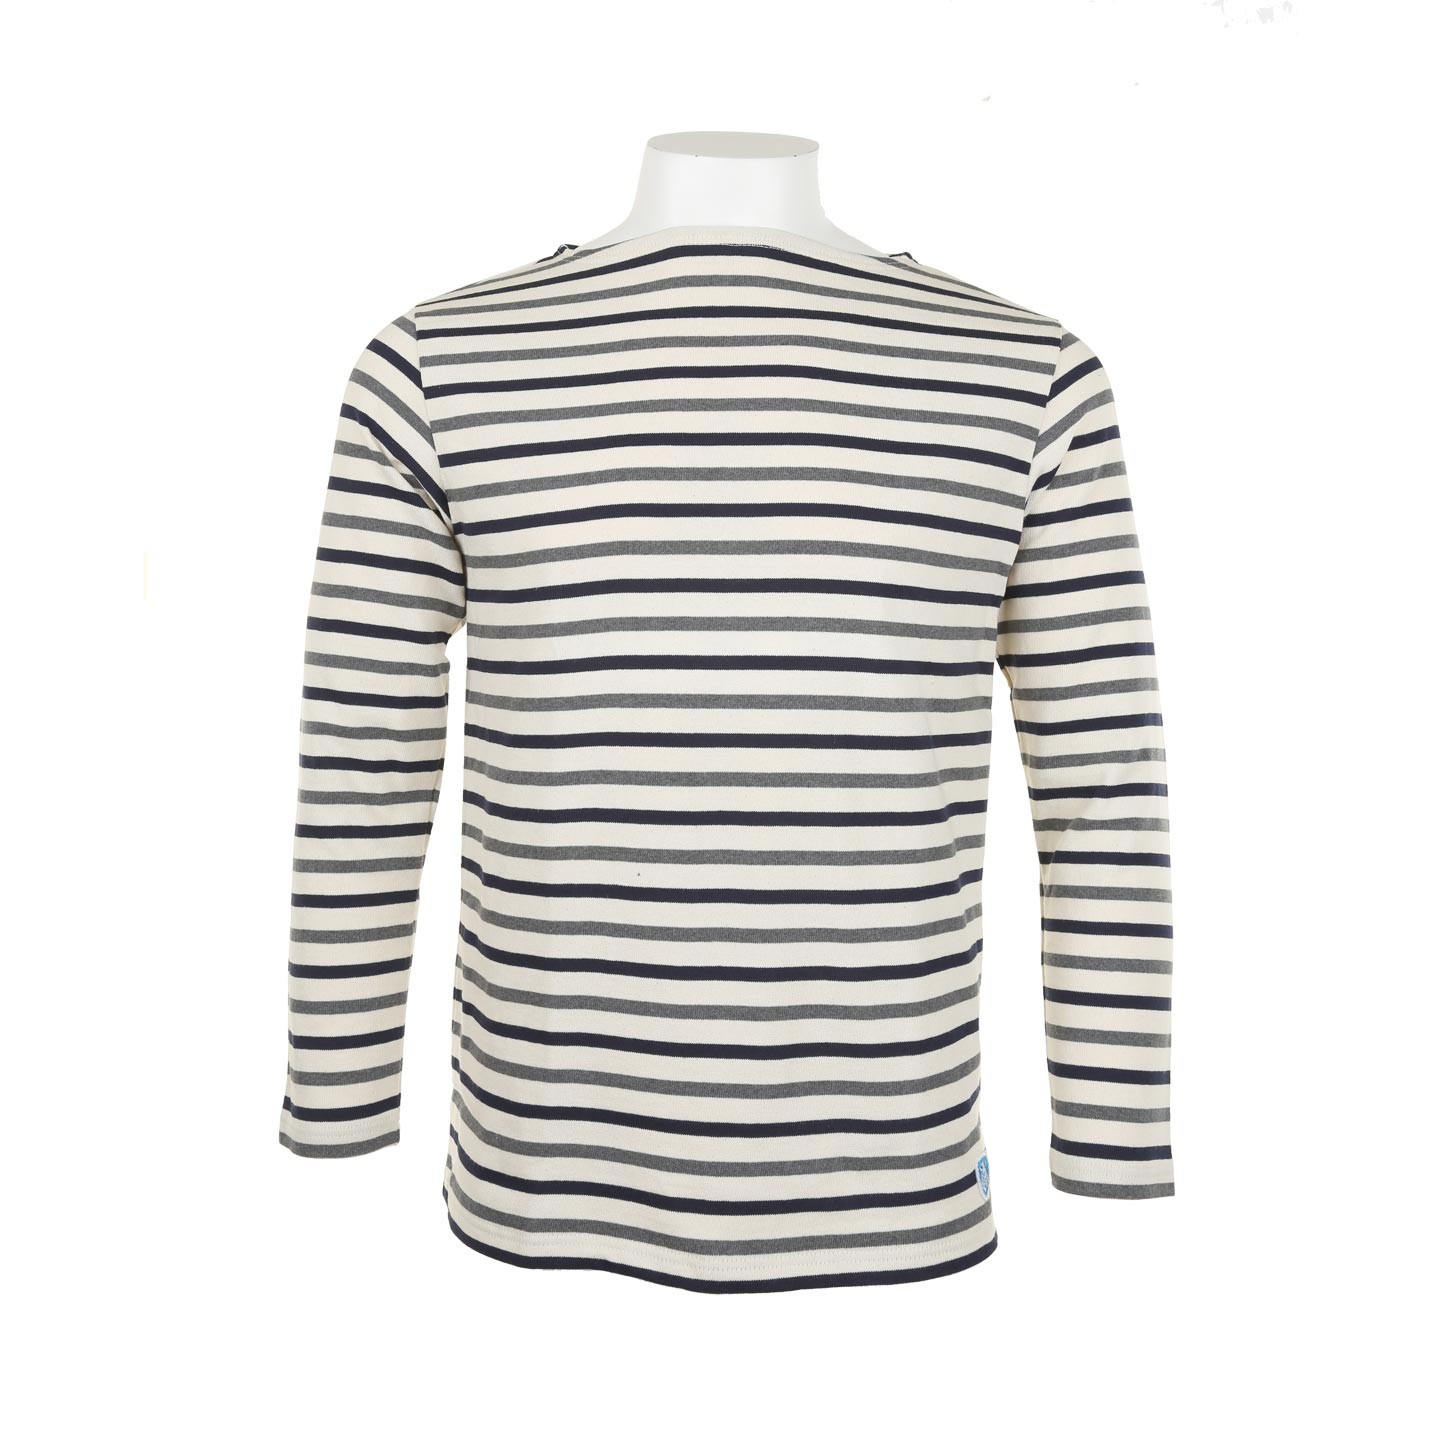 Breton shirt Écru / Amiral / Anthracite, mixte made in France Orcival